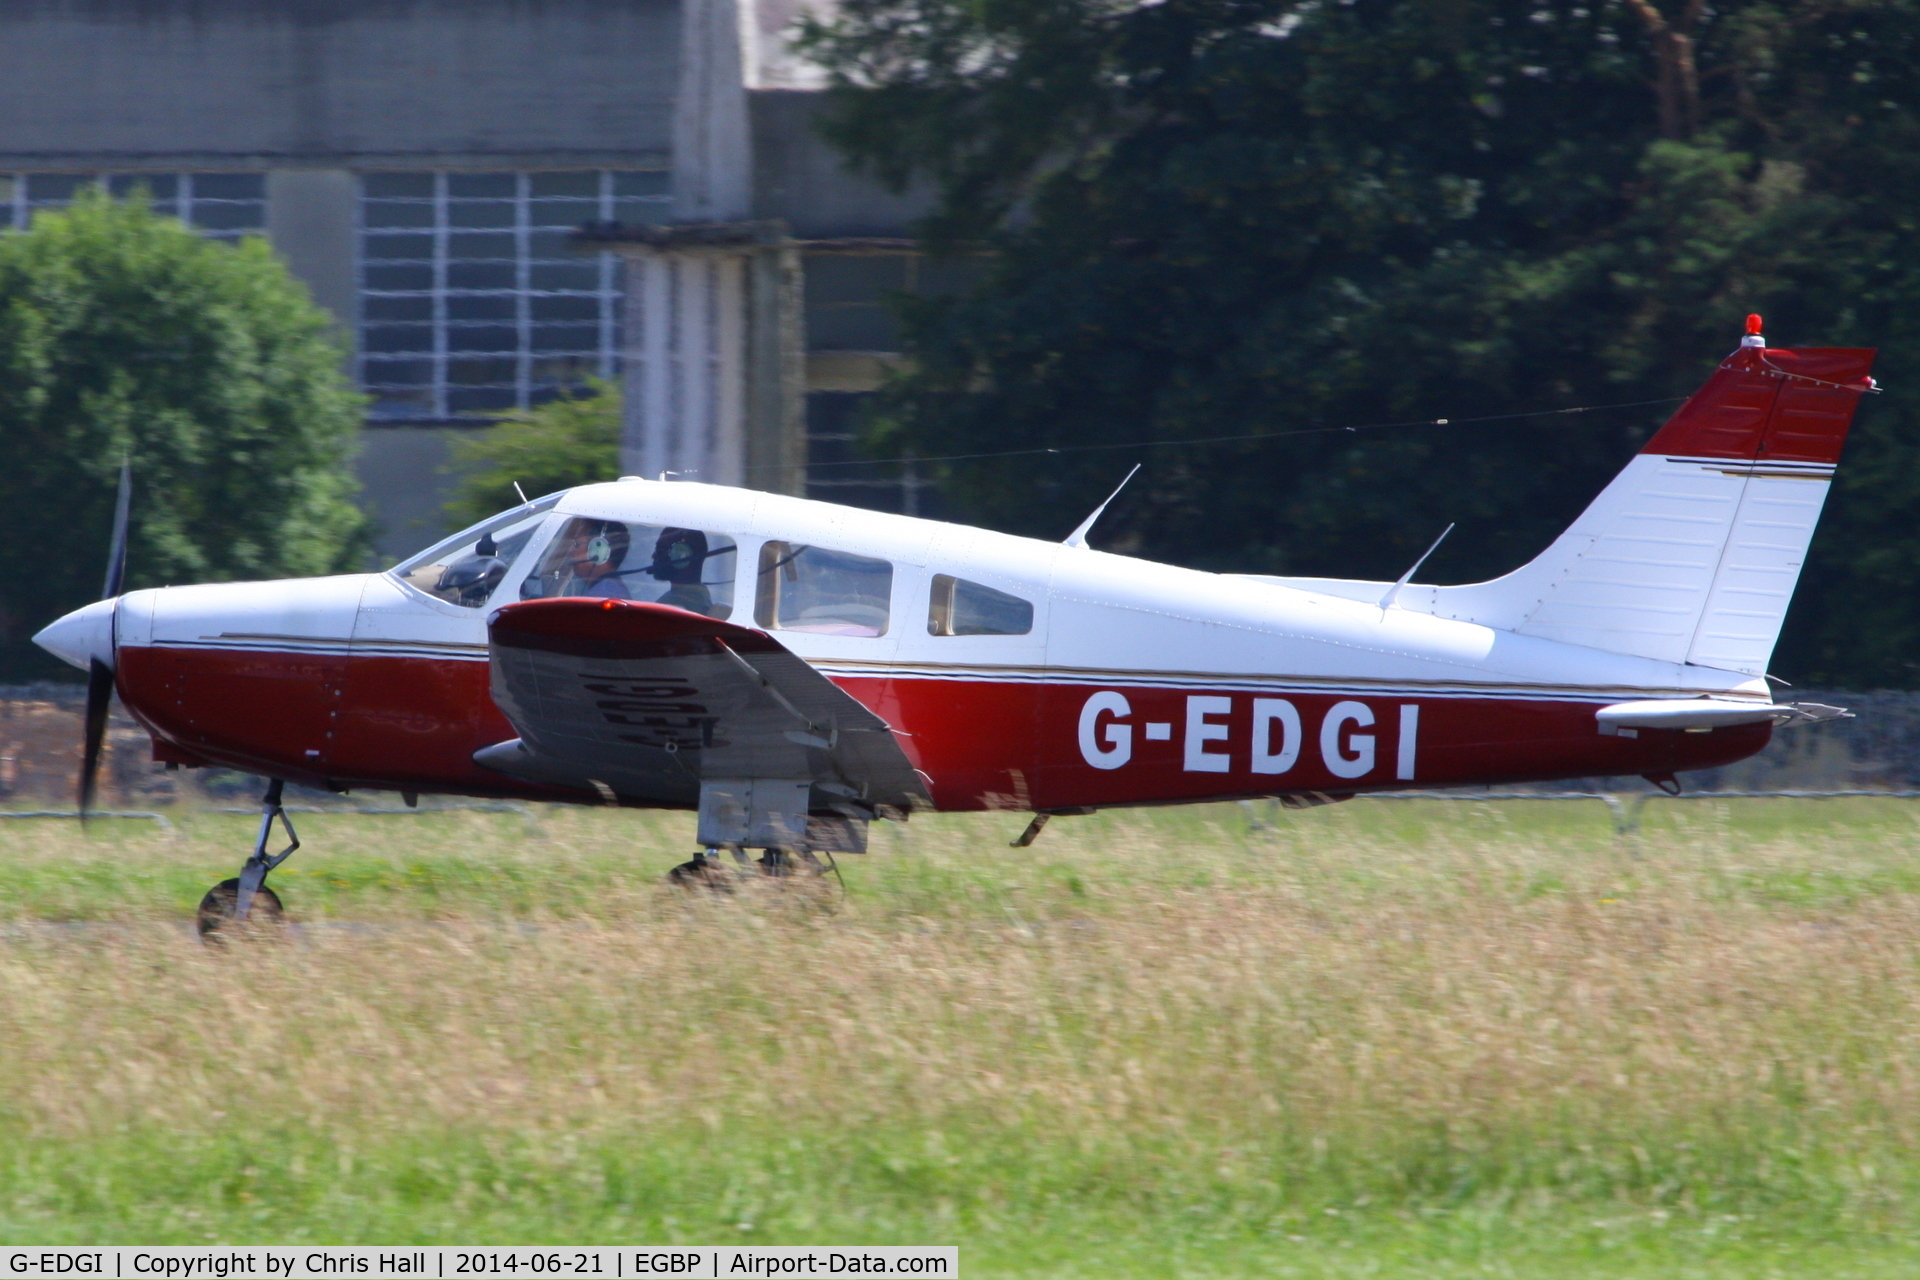 G-EDGI, 1979 Piper PA-28-161 Warrior II C/N 28-7916565, privately owned